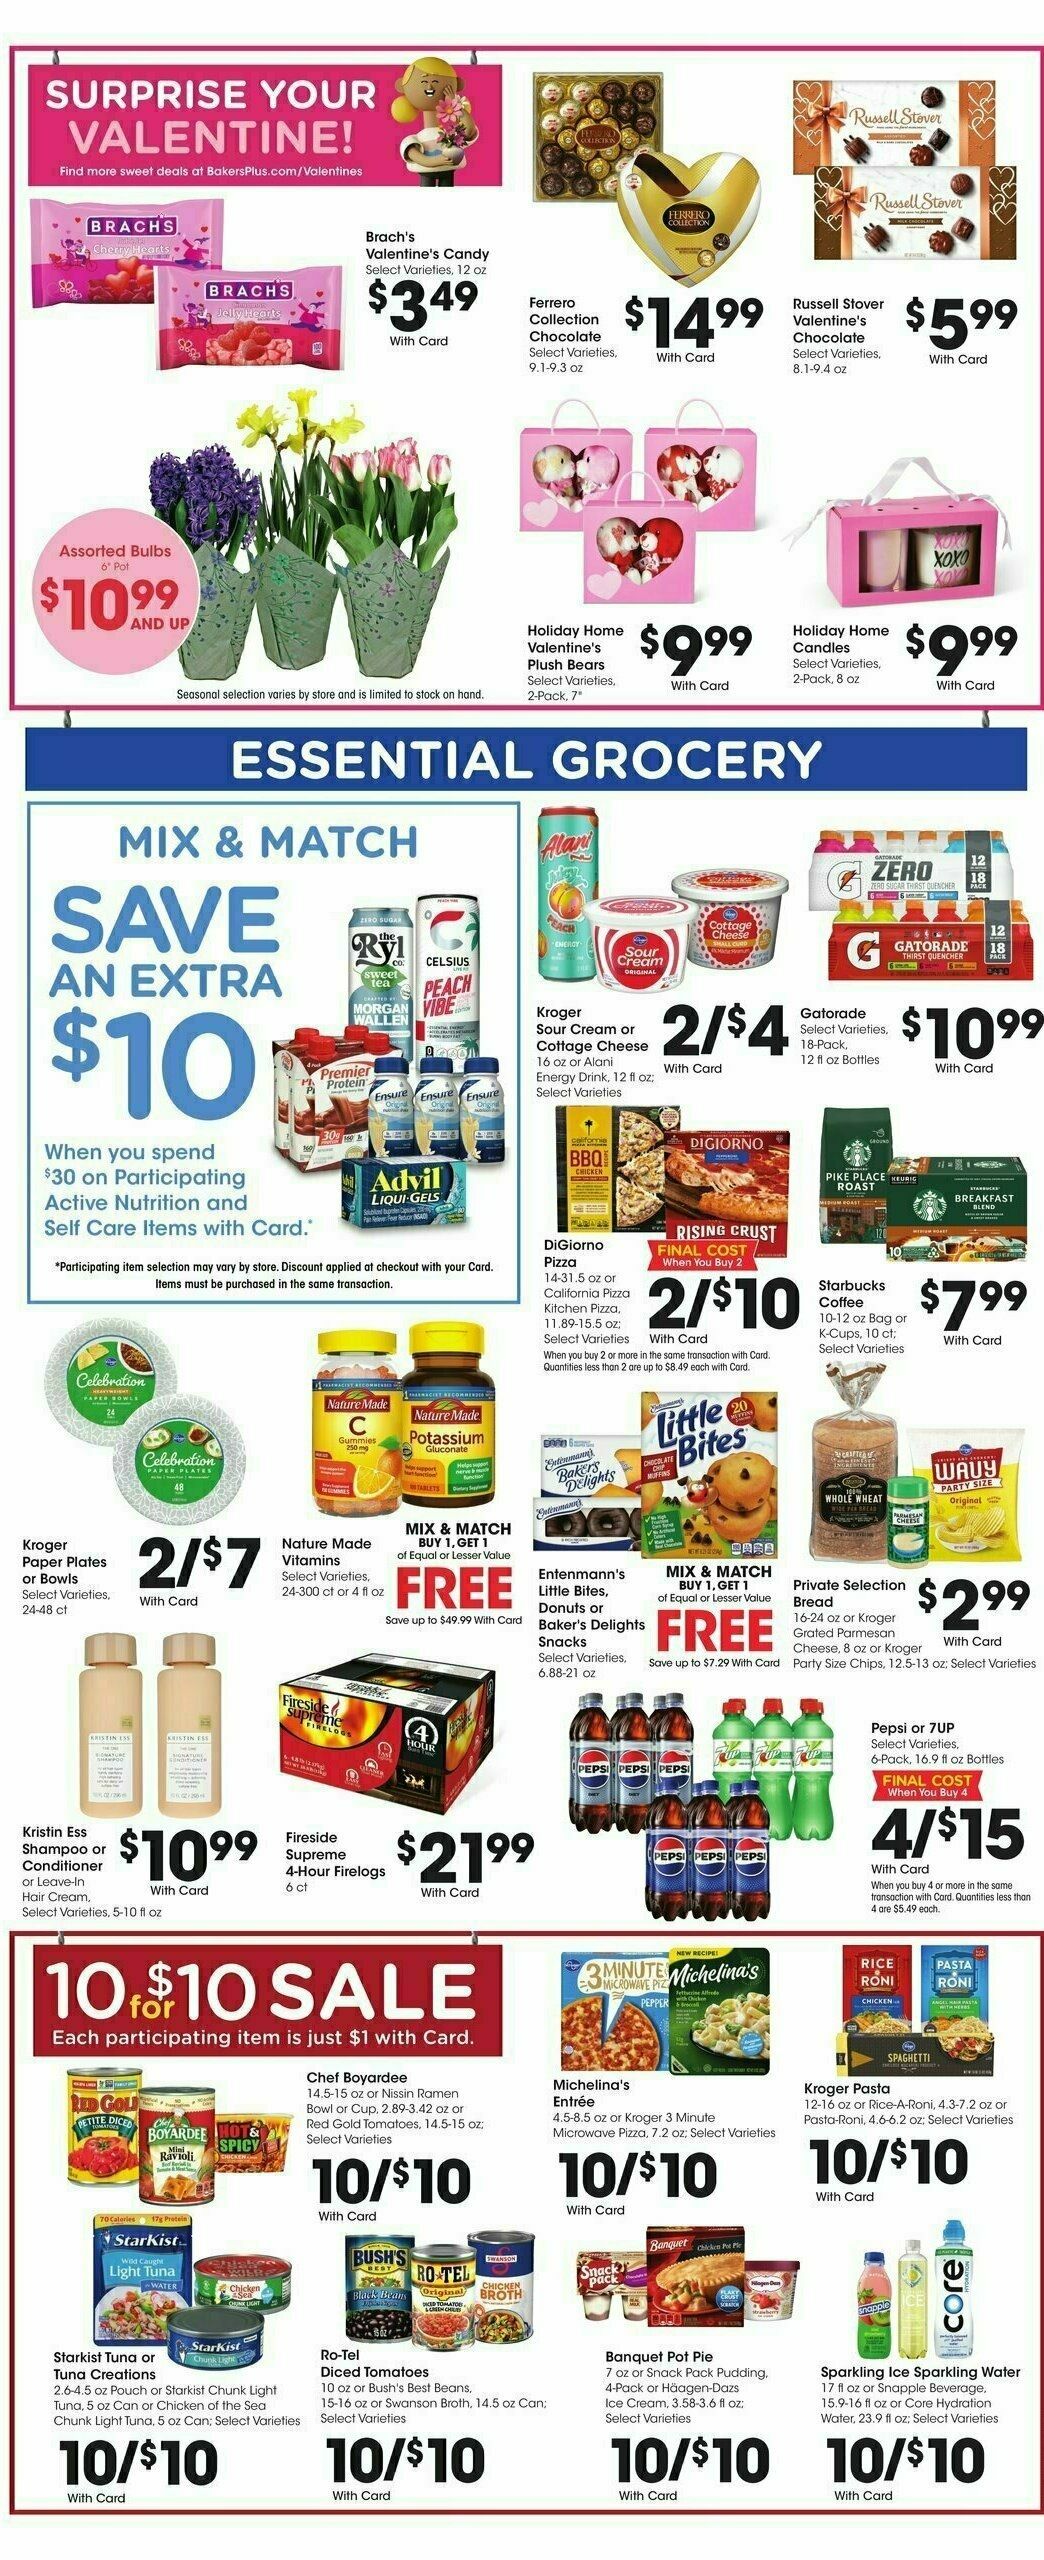 Baker's Weekly Ad from January 31